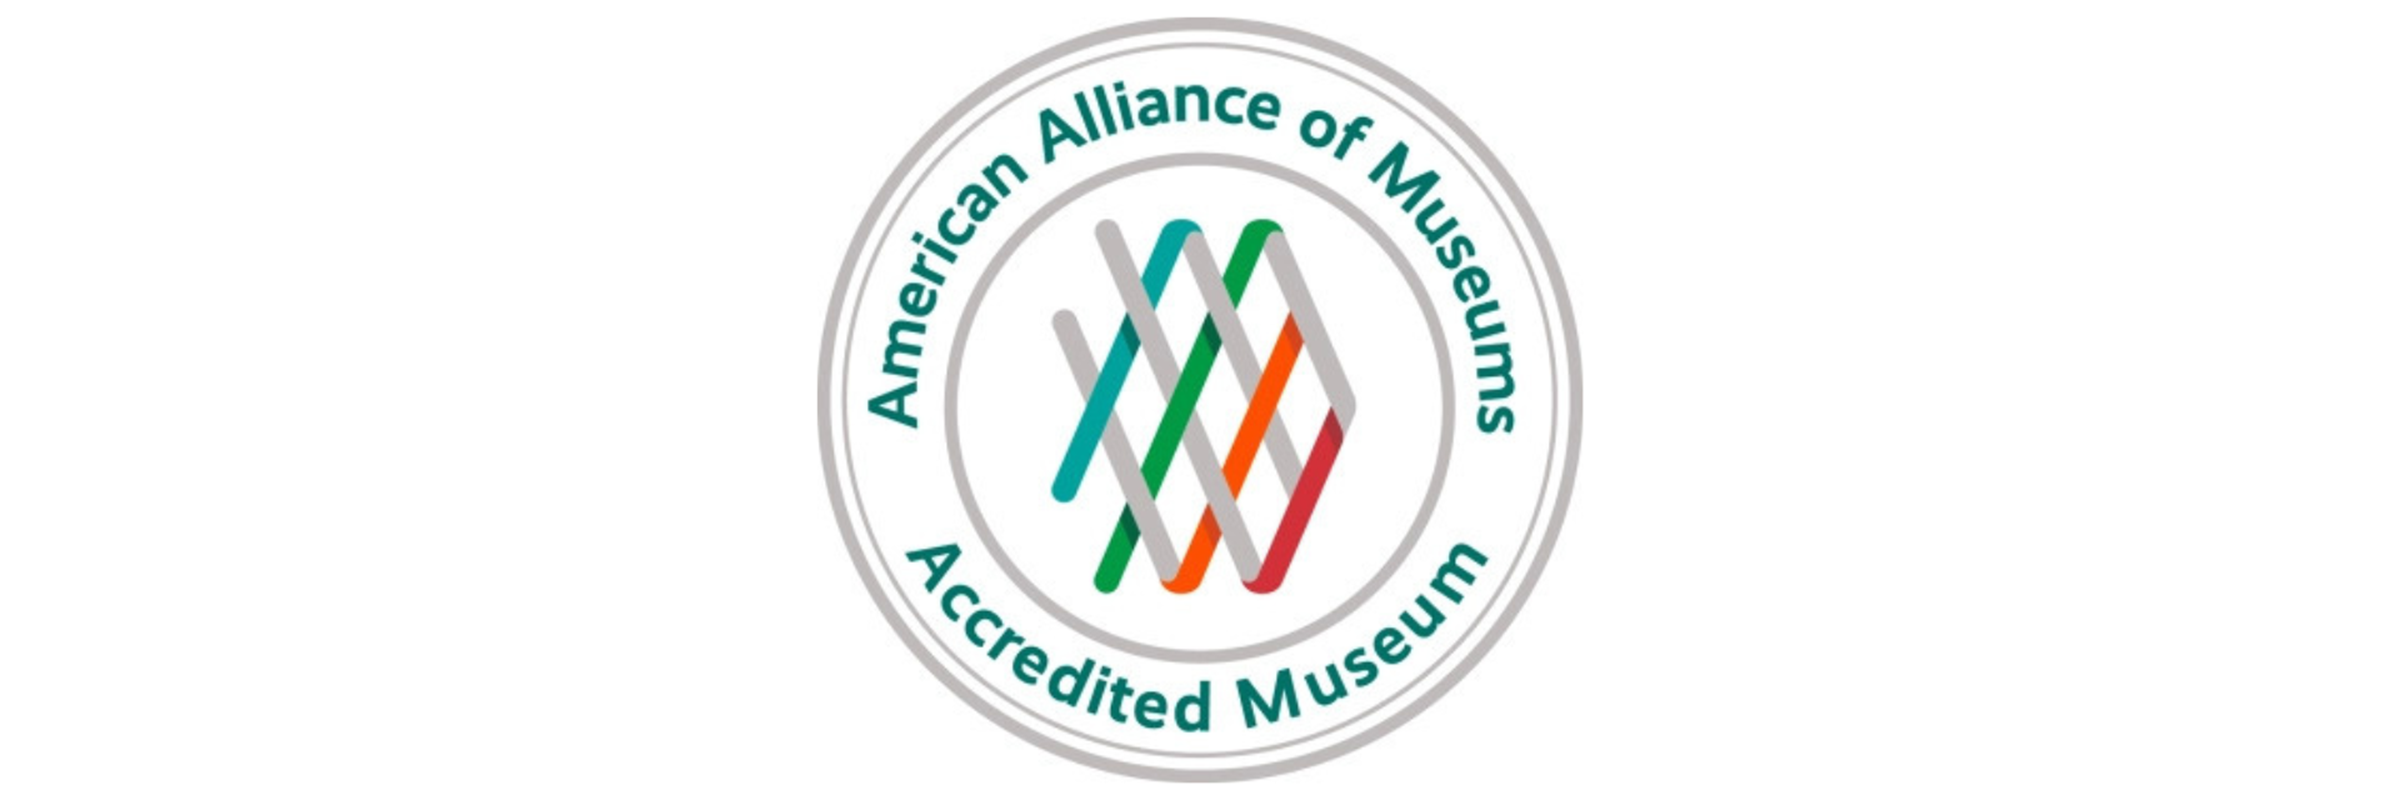 Museum Receives Highest National Recognition